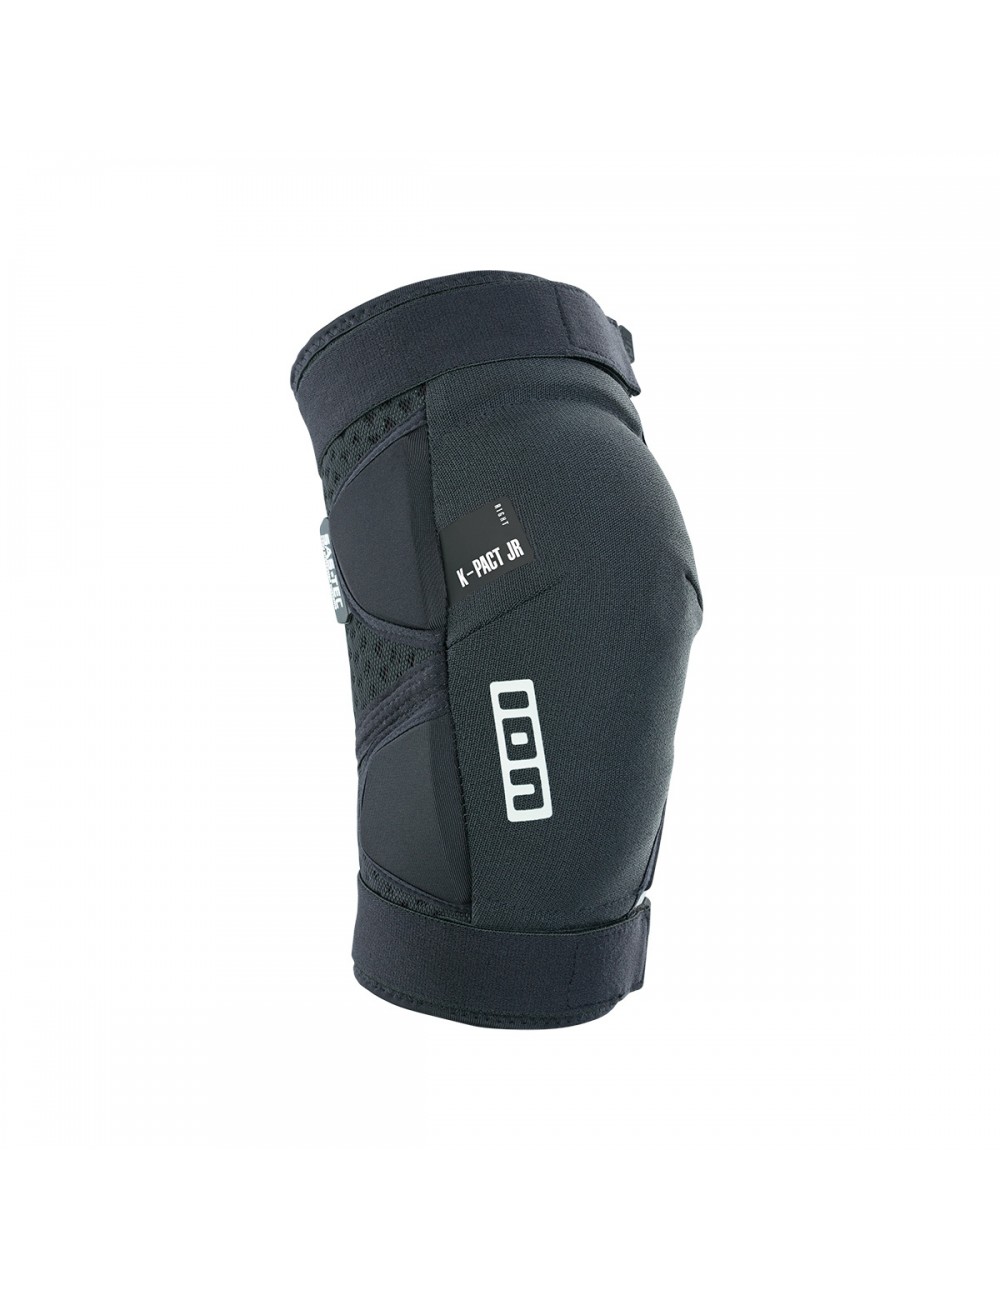 ION Youth Knee Pads Pact Protector - Black